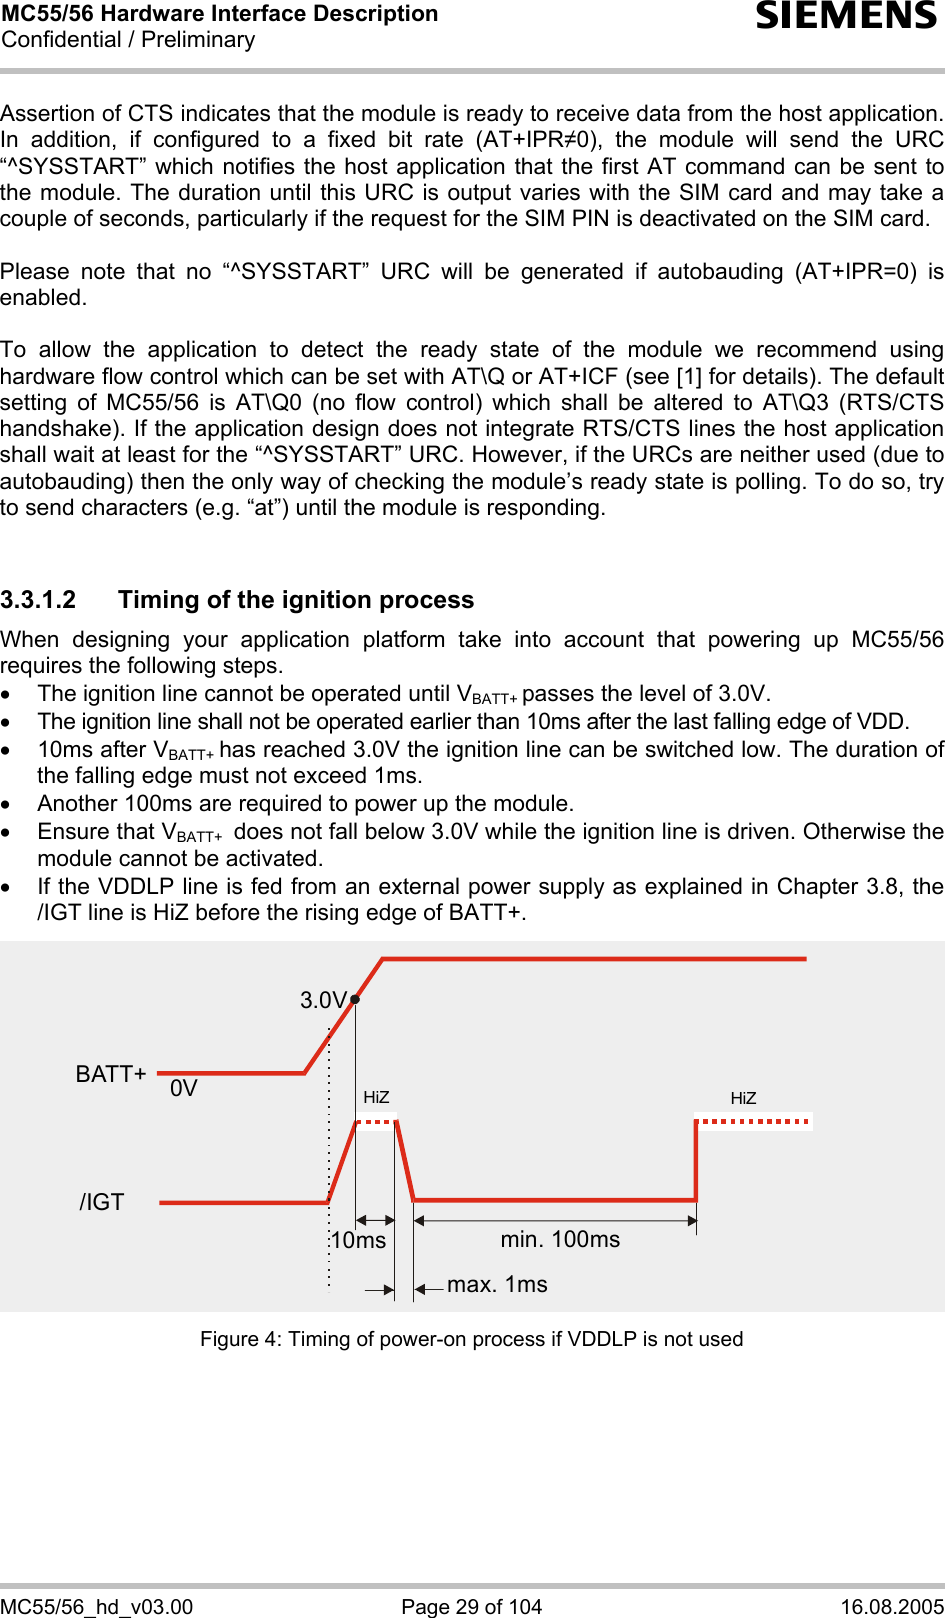 MC55/56 Hardware Interface Description Confidential / Preliminary s MC55/56_hd_v03.00  Page 29 of 104  16.08.2005 Assertion of CTS indicates that the module is ready to receive data from the host application. In addition, if configured to a fixed bit rate (AT+IPR0), the module will send the URC “^SYSSTART” which notifies the host application that the first AT command can be sent to the module. The duration until this URC is output varies with the SIM card and may take a couple of seconds, particularly if the request for the SIM PIN is deactivated on the SIM card.   Please note that no “^SYSSTART” URC will be generated if autobauding (AT+IPR=0) is enabled.   To allow the application to detect the ready state of the module we recommend using hardware flow control which can be set with AT\Q or AT+ICF (see [1] for details). The default setting of MC55/56 is AT\Q0 (no flow control) which shall be altered to AT\Q3 (RTS/CTS handshake). If the application design does not integrate RTS/CTS lines the host application shall wait at least for the “^SYSSTART” URC. However, if the URCs are neither used (due to autobauding) then the only way of checking the module’s ready state is polling. To do so, try to send characters (e.g. “at”) until the module is responding.  3.3.1.2  Timing of the ignition process When designing your application platform take into account that powering up MC55/56 requires the following steps. •  The ignition line cannot be operated until VBATT+ passes the level of 3.0V. •  The ignition line shall not be operated earlier than 10ms after the last falling edge of VDD. •  10ms after VBATT+ has reached 3.0V the ignition line can be switched low. The duration of the falling edge must not exceed 1ms. •  Another 100ms are required to power up the module.  •  Ensure that VBATT+  does not fall below 3.0V while the ignition line is driven. Otherwise the module cannot be activated.  •  If the VDDLP line is fed from an external power supply as explained in Chapter 3.8, the /IGT line is HiZ before the rising edge of BATT+. Figure 4: Timing of power-on process if VDDLP is not used  3.0V0VBATT+min. 100msmax. 1ms10ms/IGTHiZHiZ